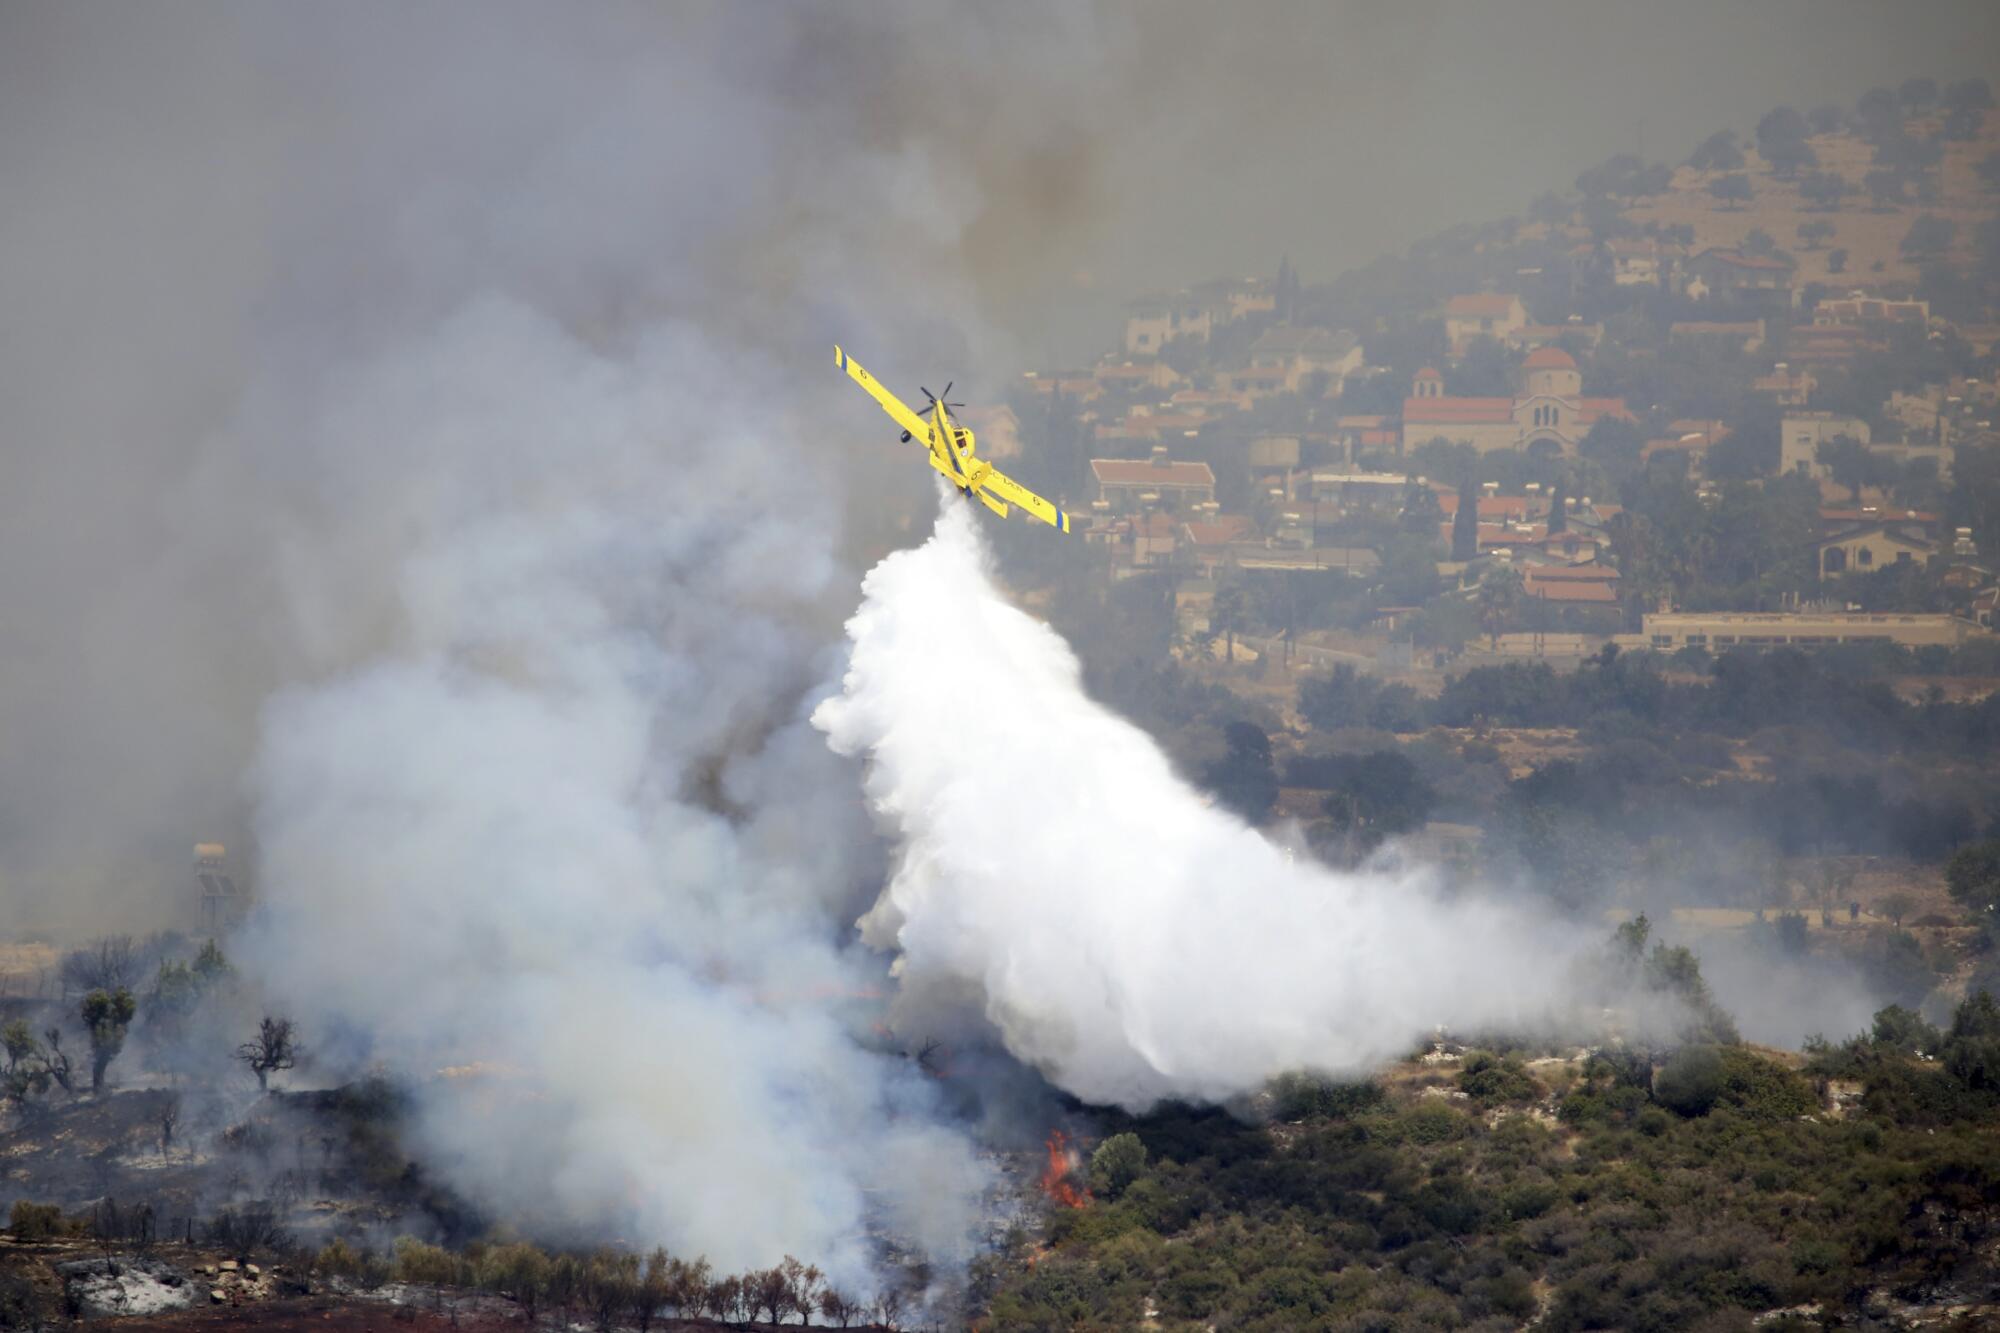 An aircraft drops water over a fire in Apesia, a semi-mountainous village near Limassol, southwestern Cyprus.